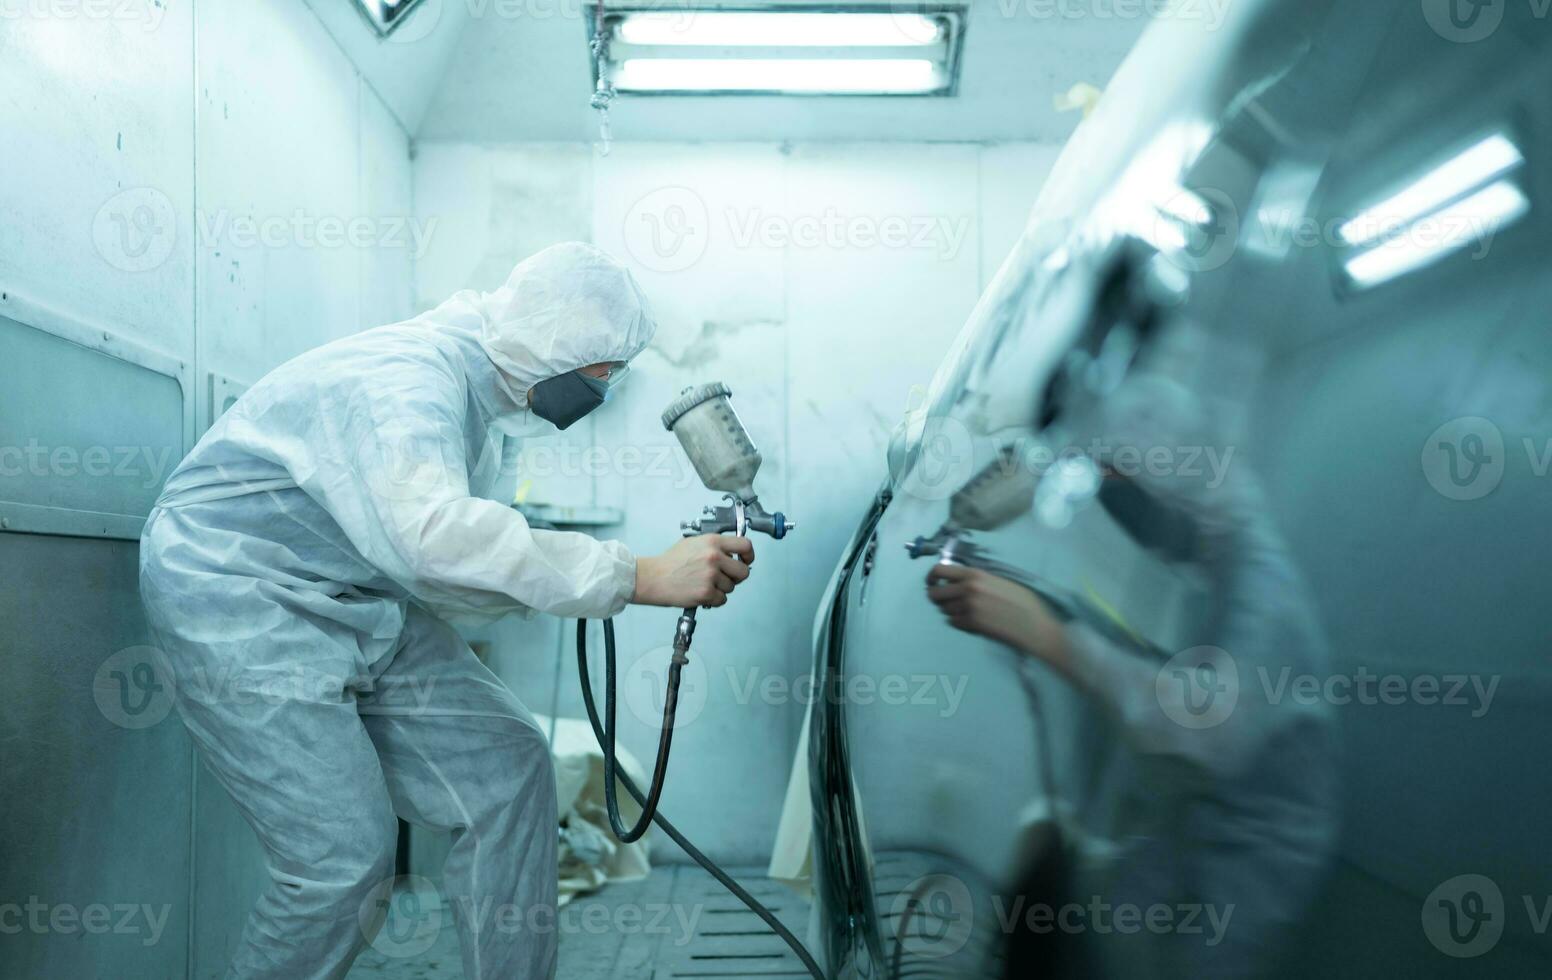 Auto mechanic in car spray room Use a spray nozzle Injected to the side of the car body with care to create beauty that blends with the original color of the car. photo